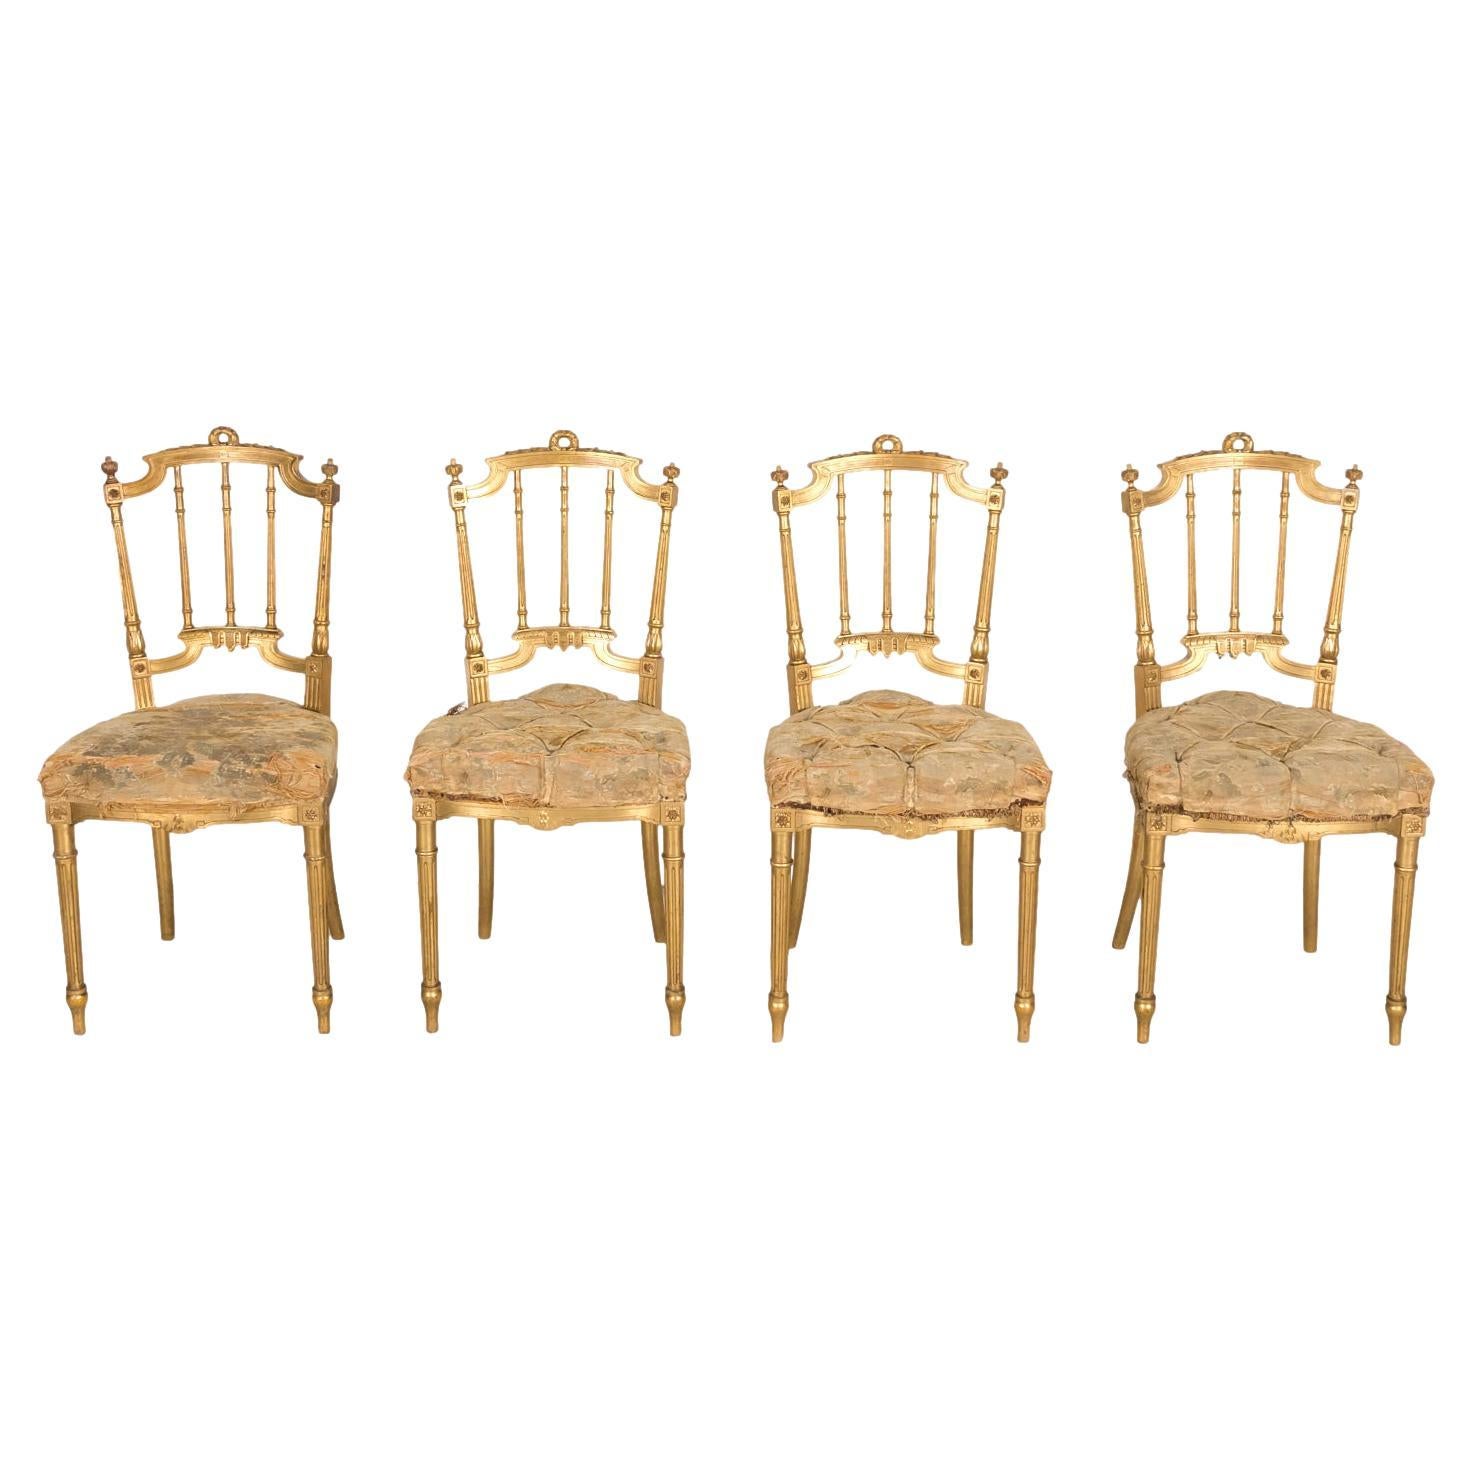  19th Century French Louis XVI Style Neoclassical Gilded Opera Chairs, 4 Avail